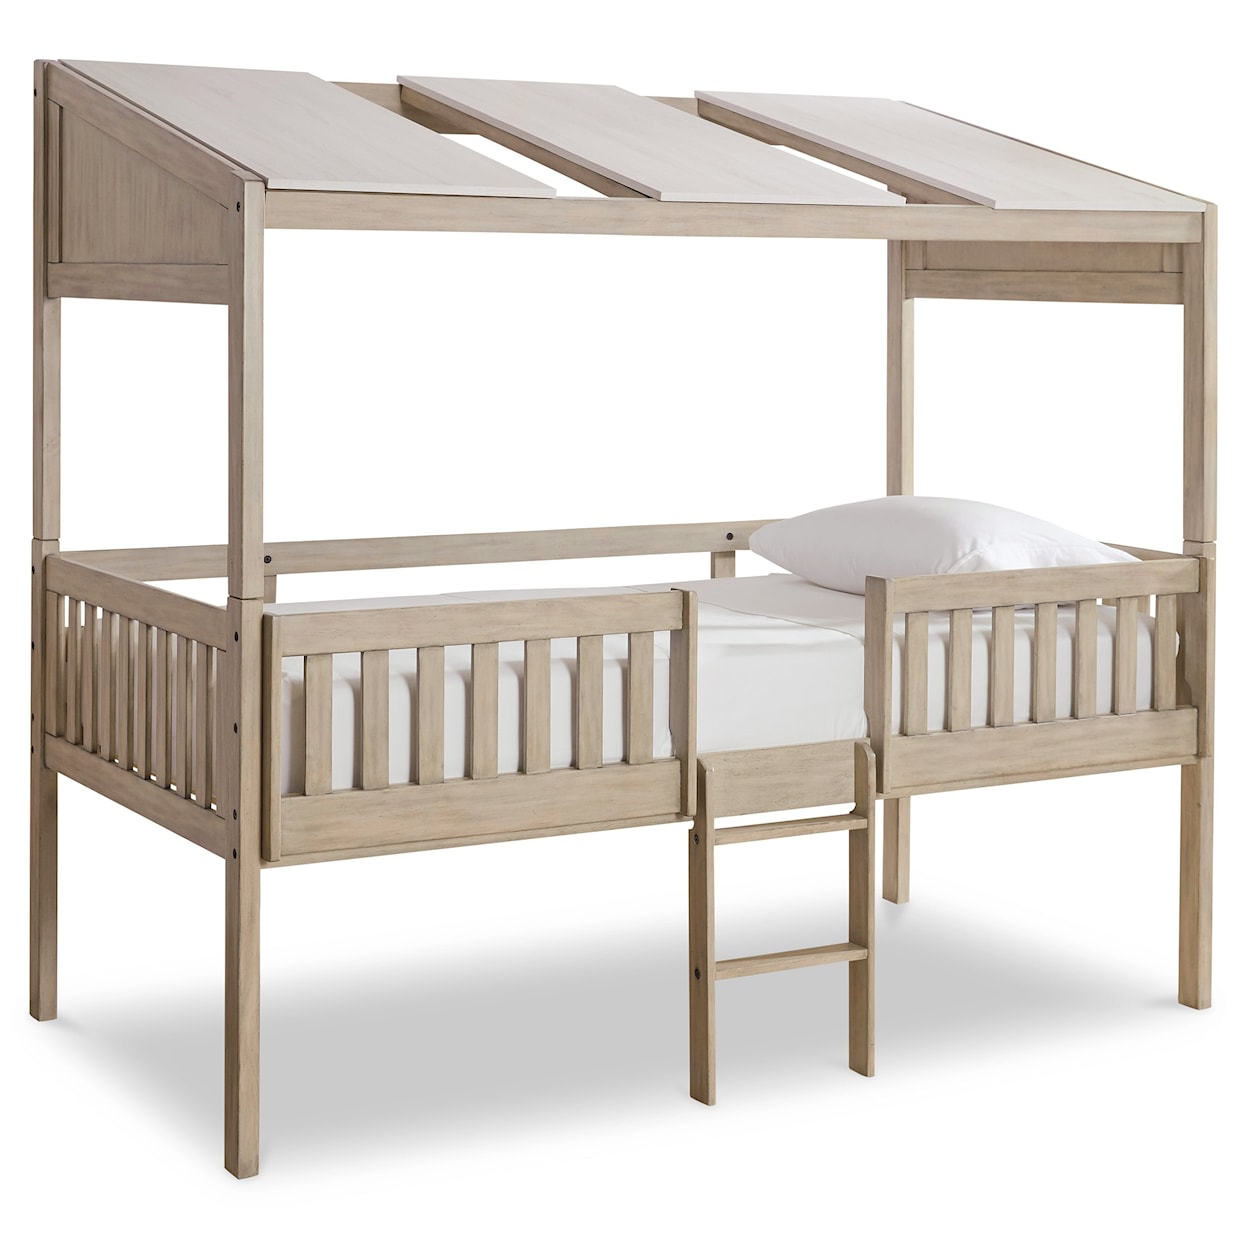 Benchcraft Wrenalyn Twin Loft Bed with Roof